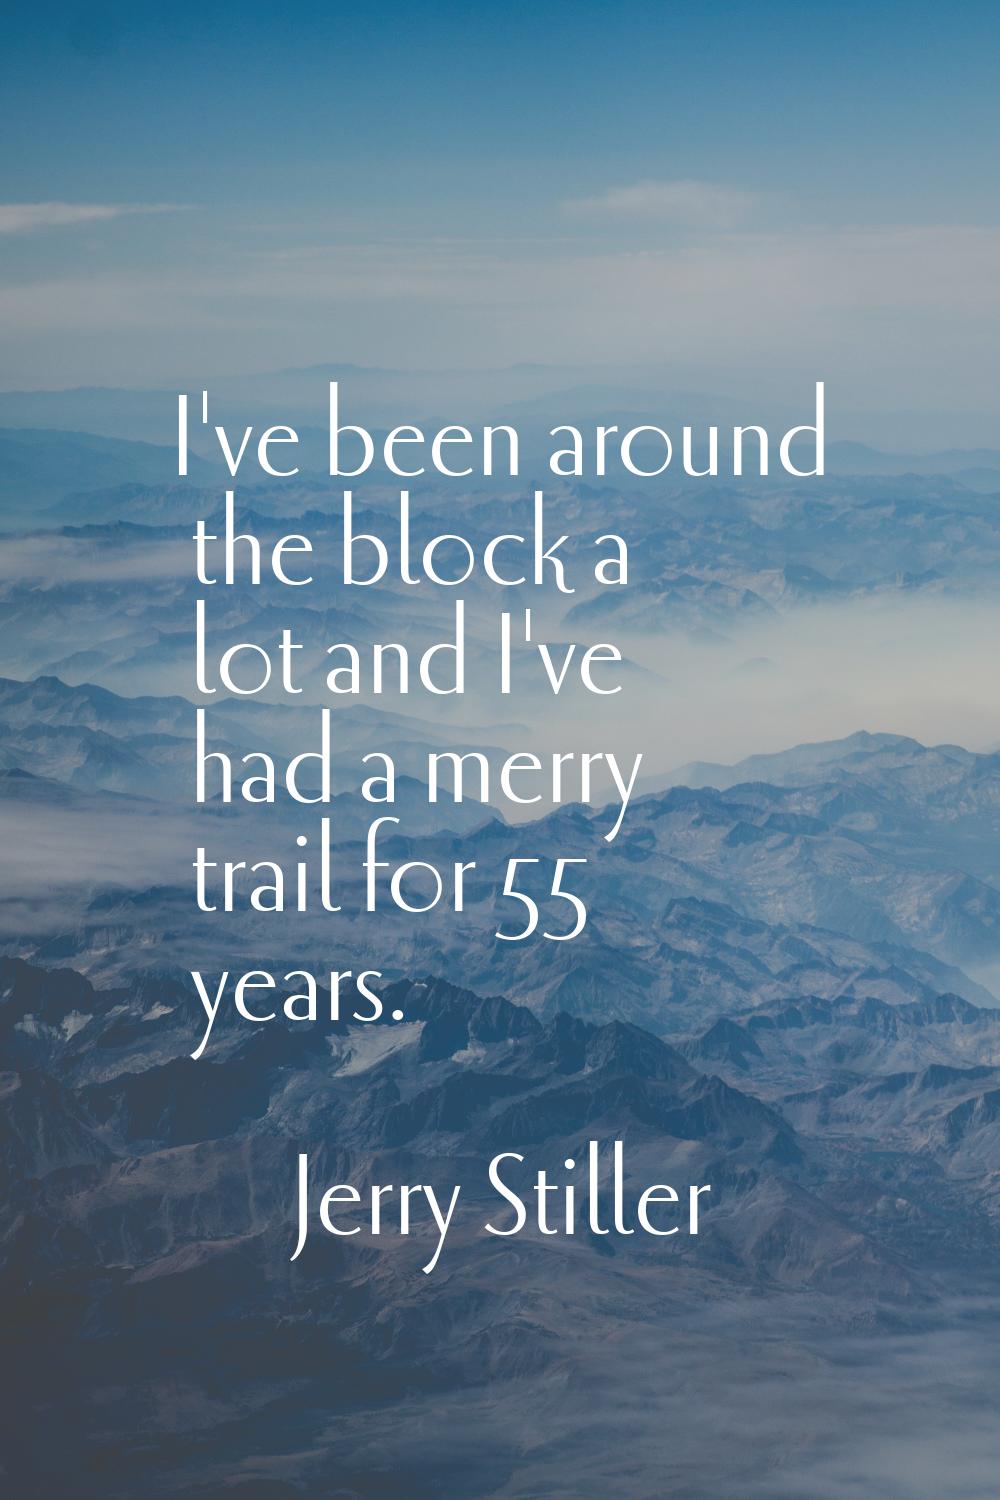 I've been around the block a lot and I've had a merry trail for 55 years.